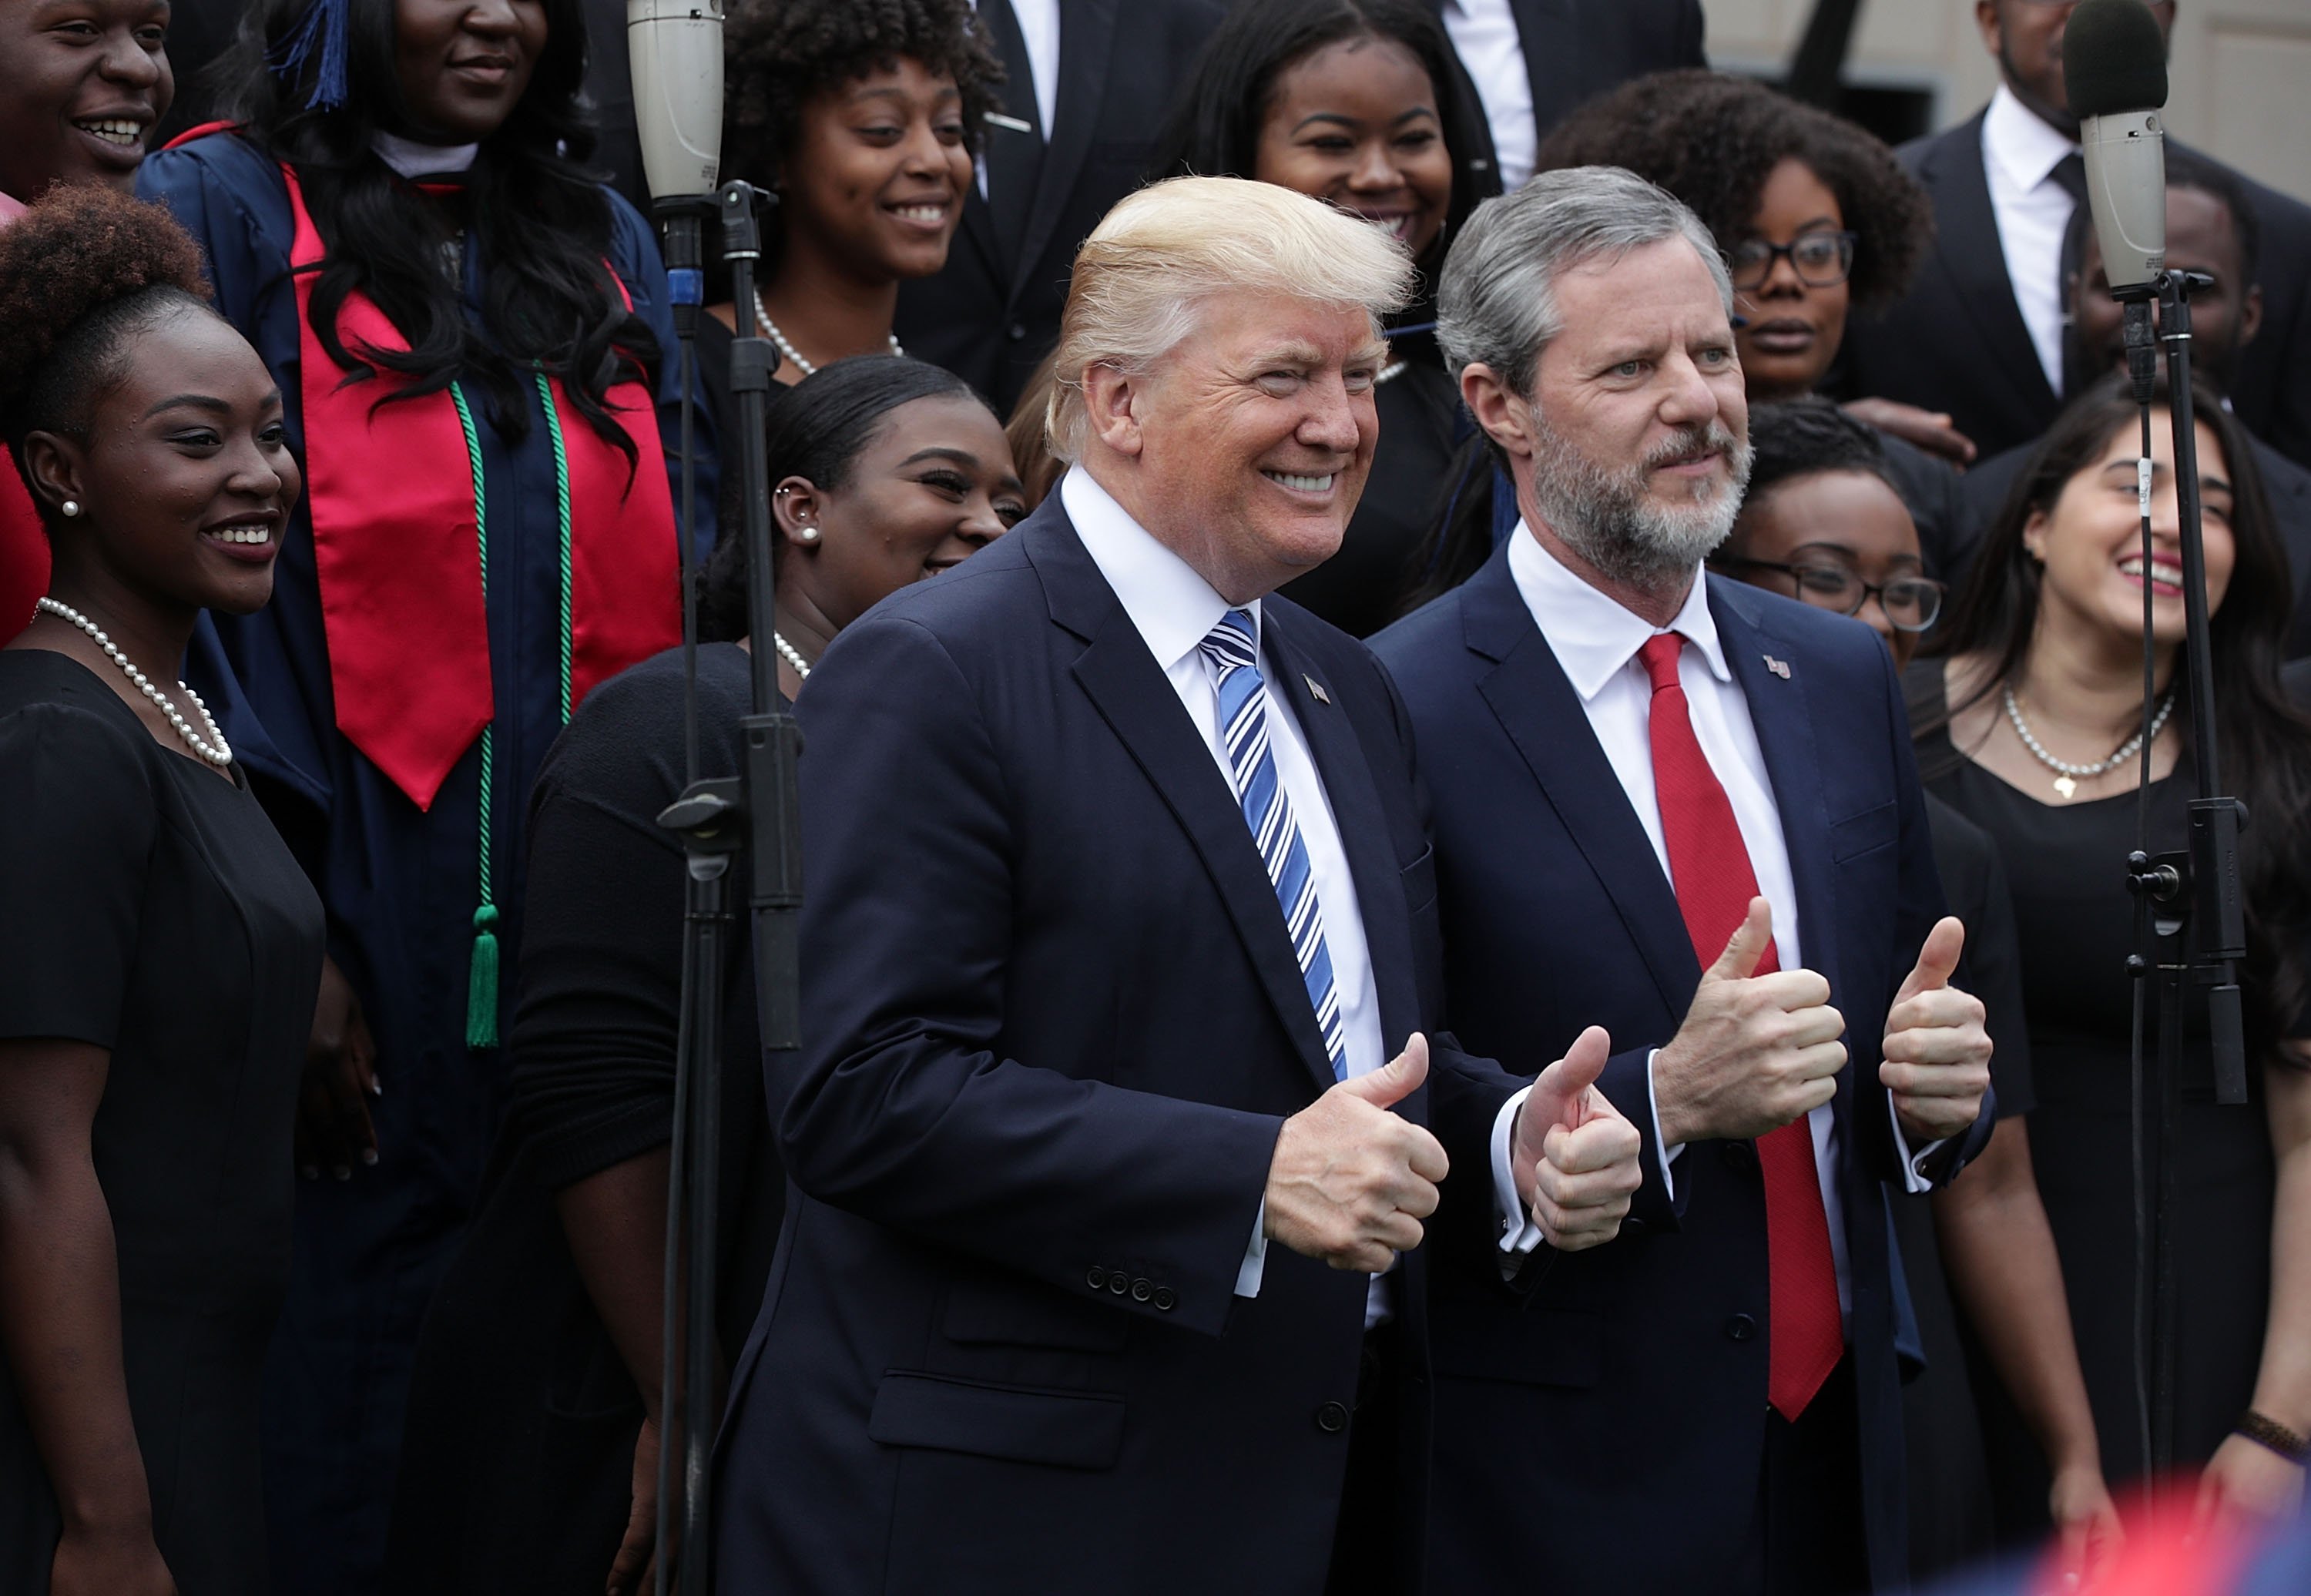 LYNCHBURG, VA - MAY 13: U.S. President Donald Trump (L) and Jerry Falwell (R), President of Liberty University, pose for photos with members of gospel choir Lu Praise during a commencement at Liberty University May 13, 2017 in Lynchburg, Virginia. President Trump is the first sitting president to speak at Liberty's commencement since George H.W. Bush spoke in 1990. (Photo by Alex Wong/Getty Images)